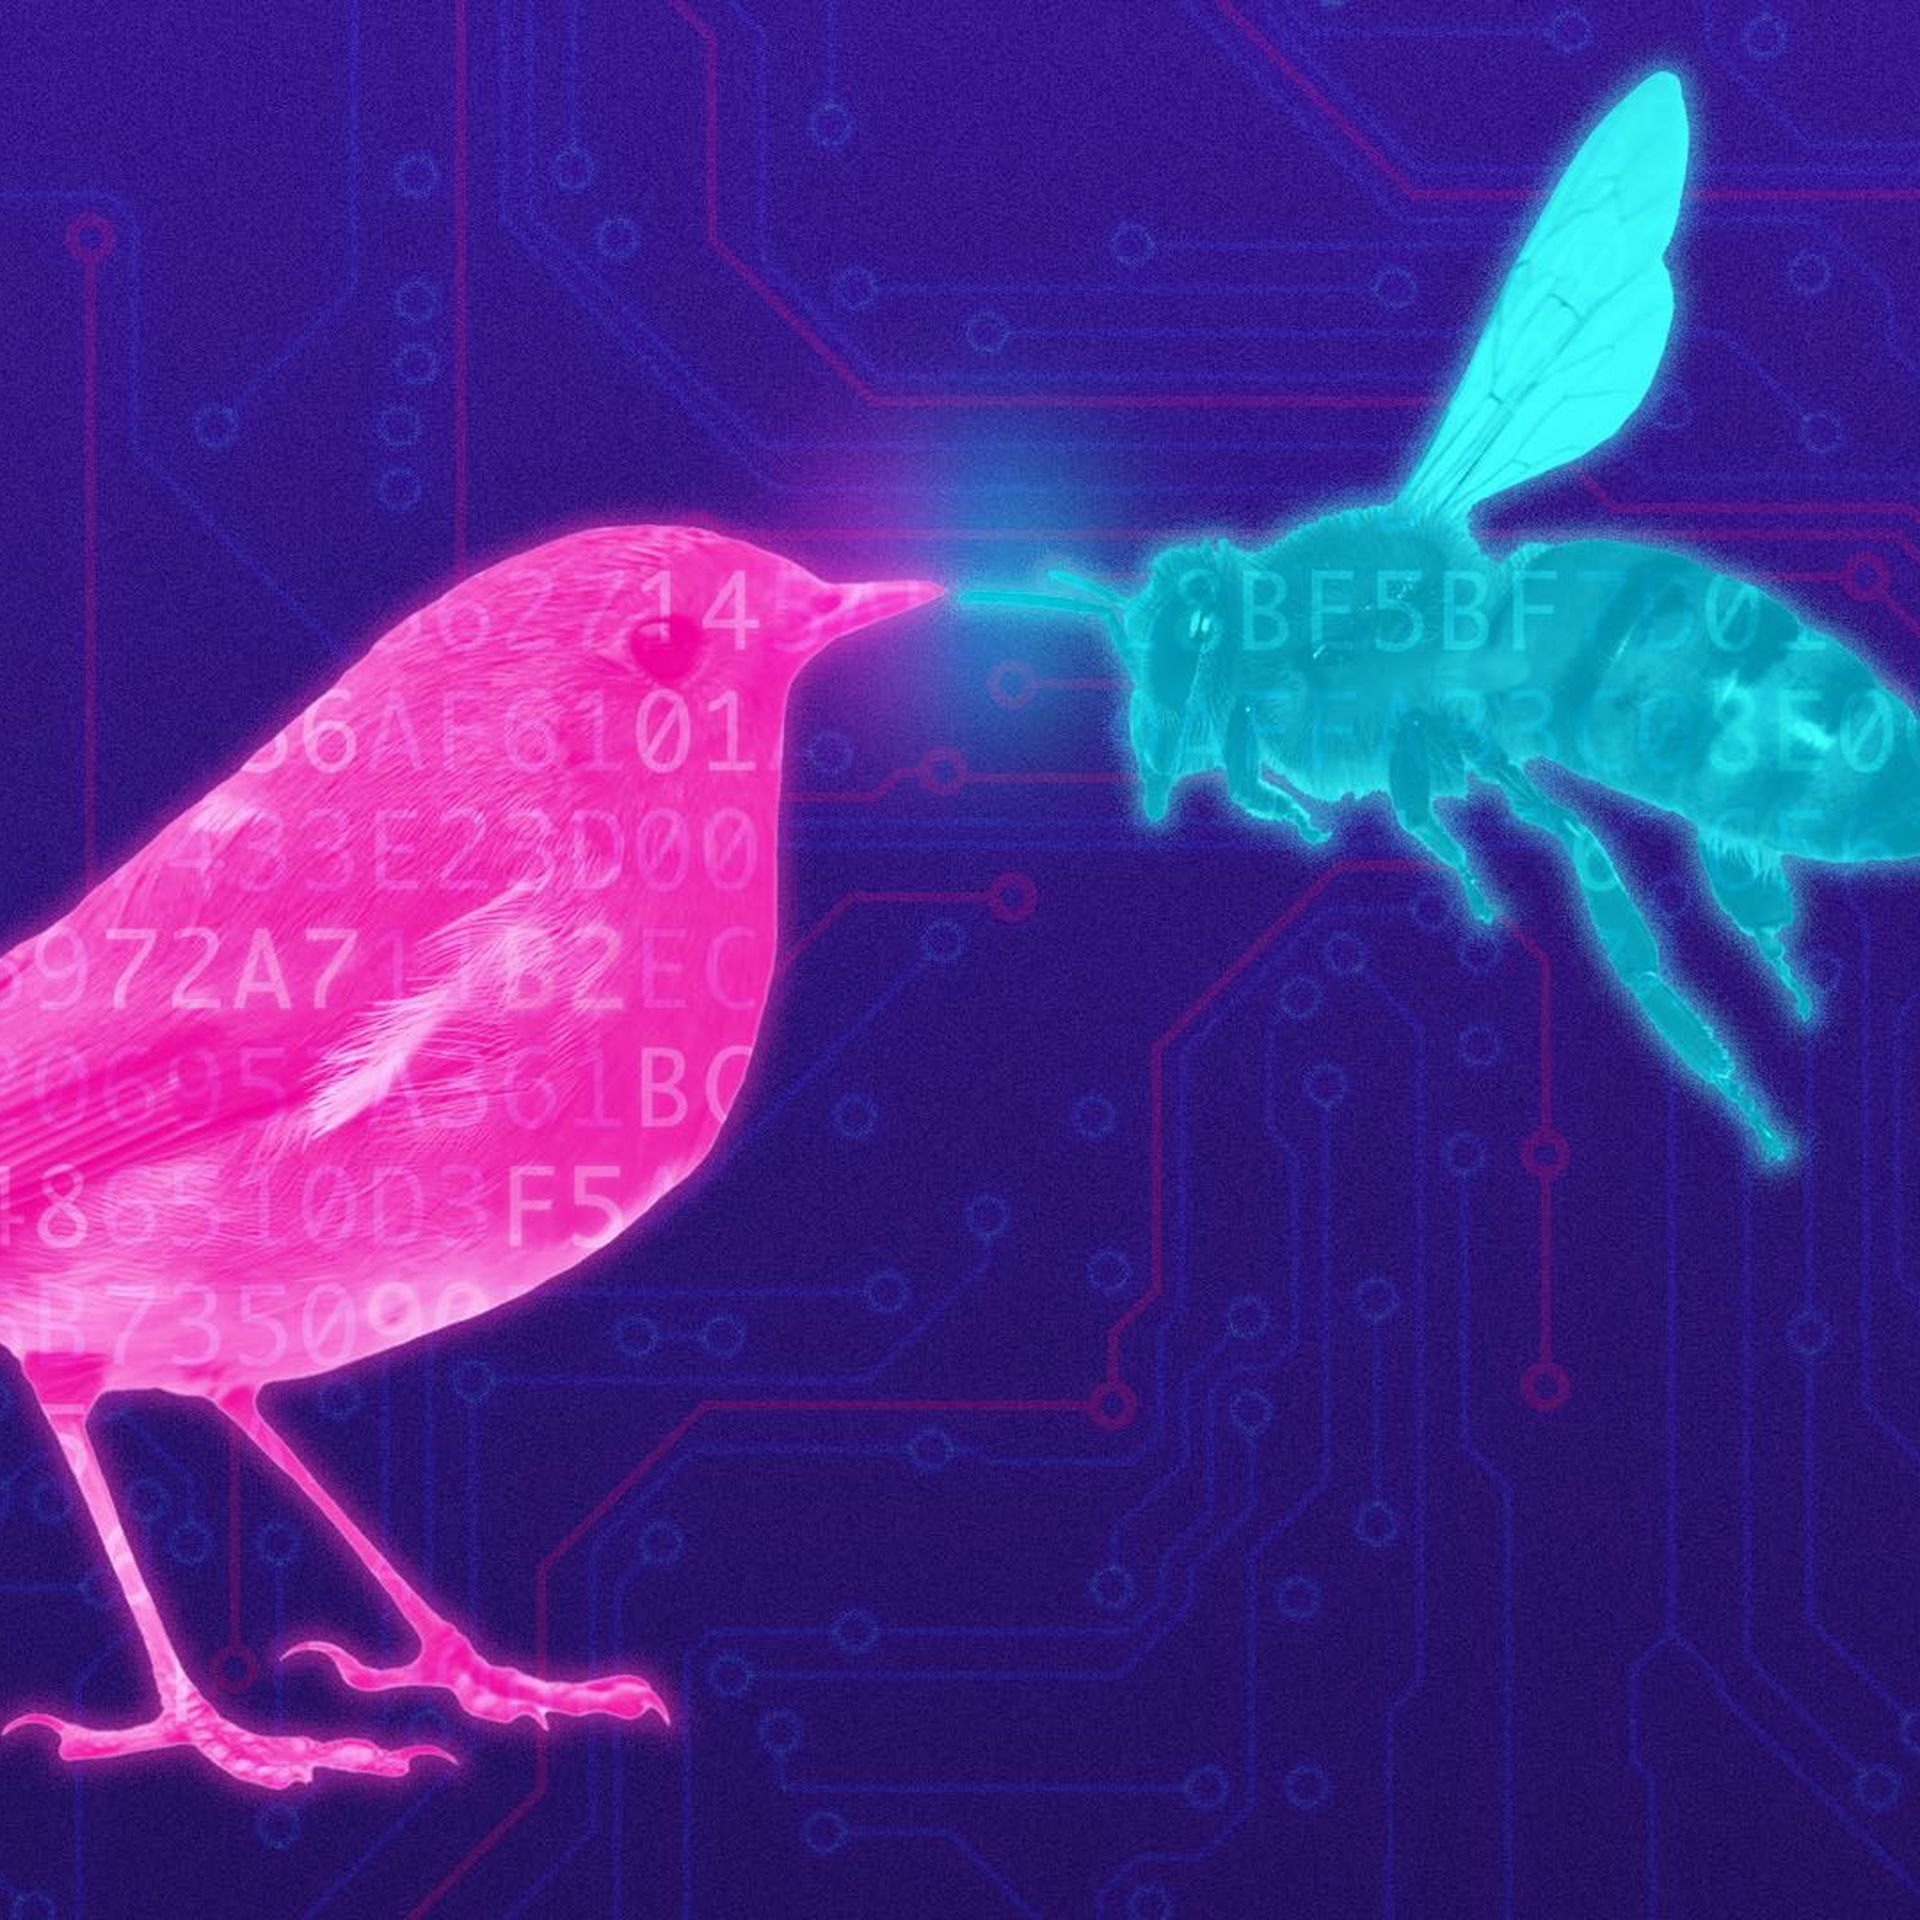 Illustration of a glowing bird and a bee with coding overlay.